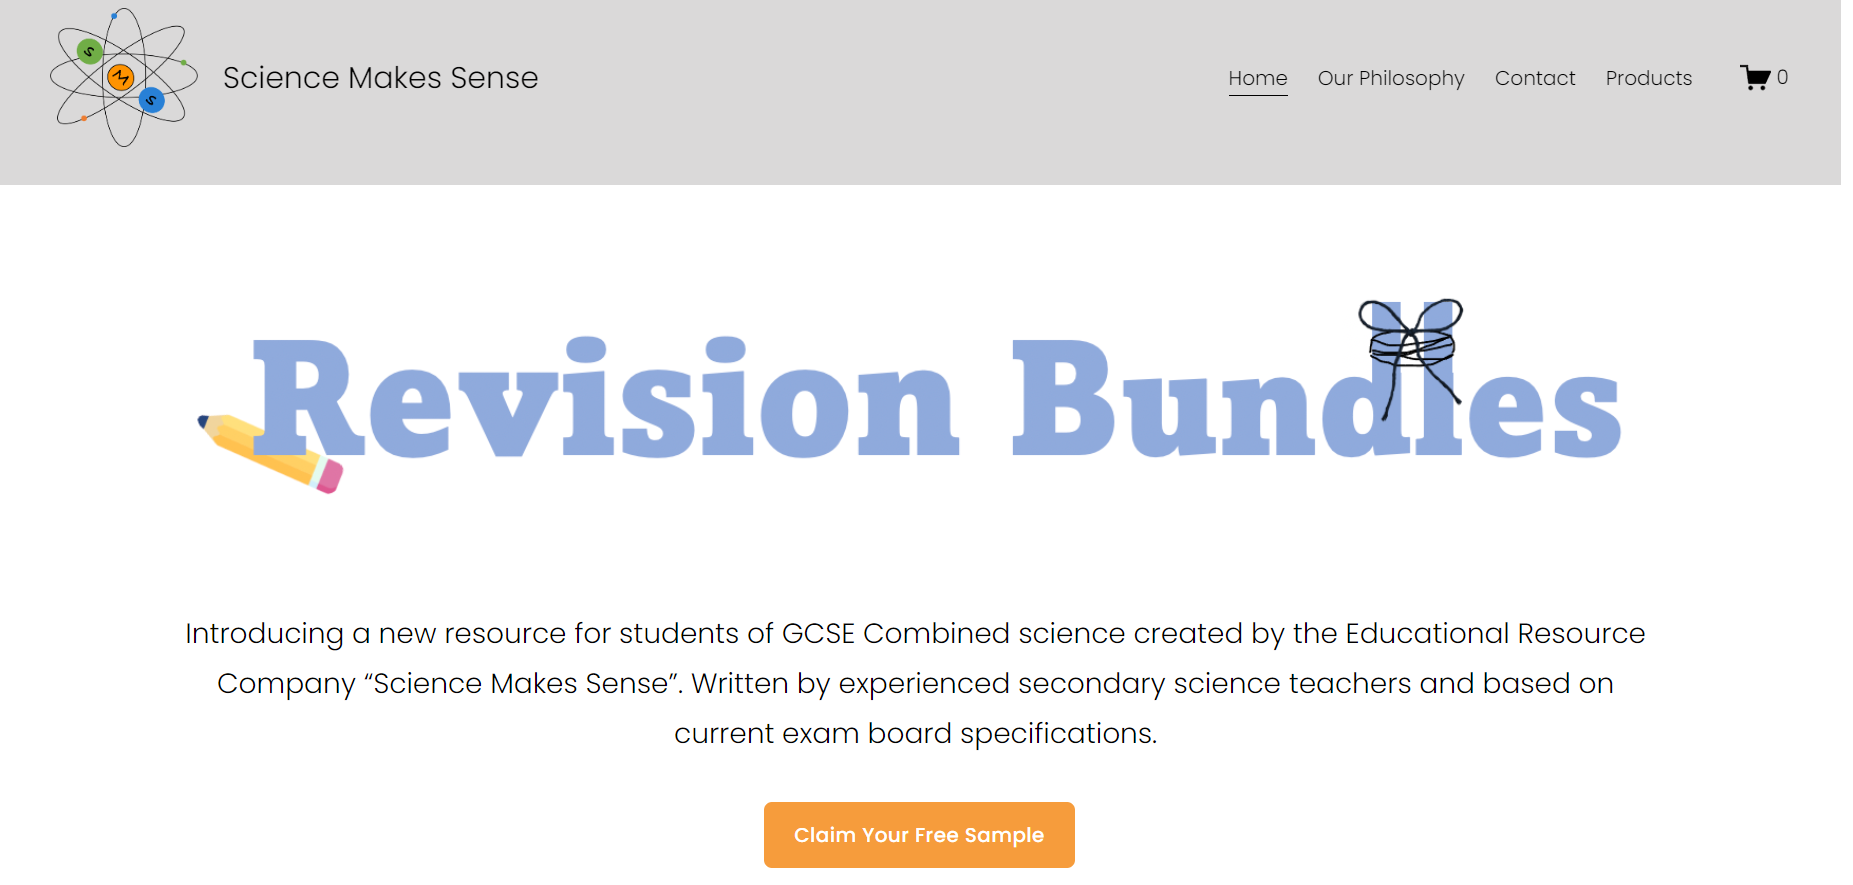 Science Makes Sense - a website that has resources for revision.